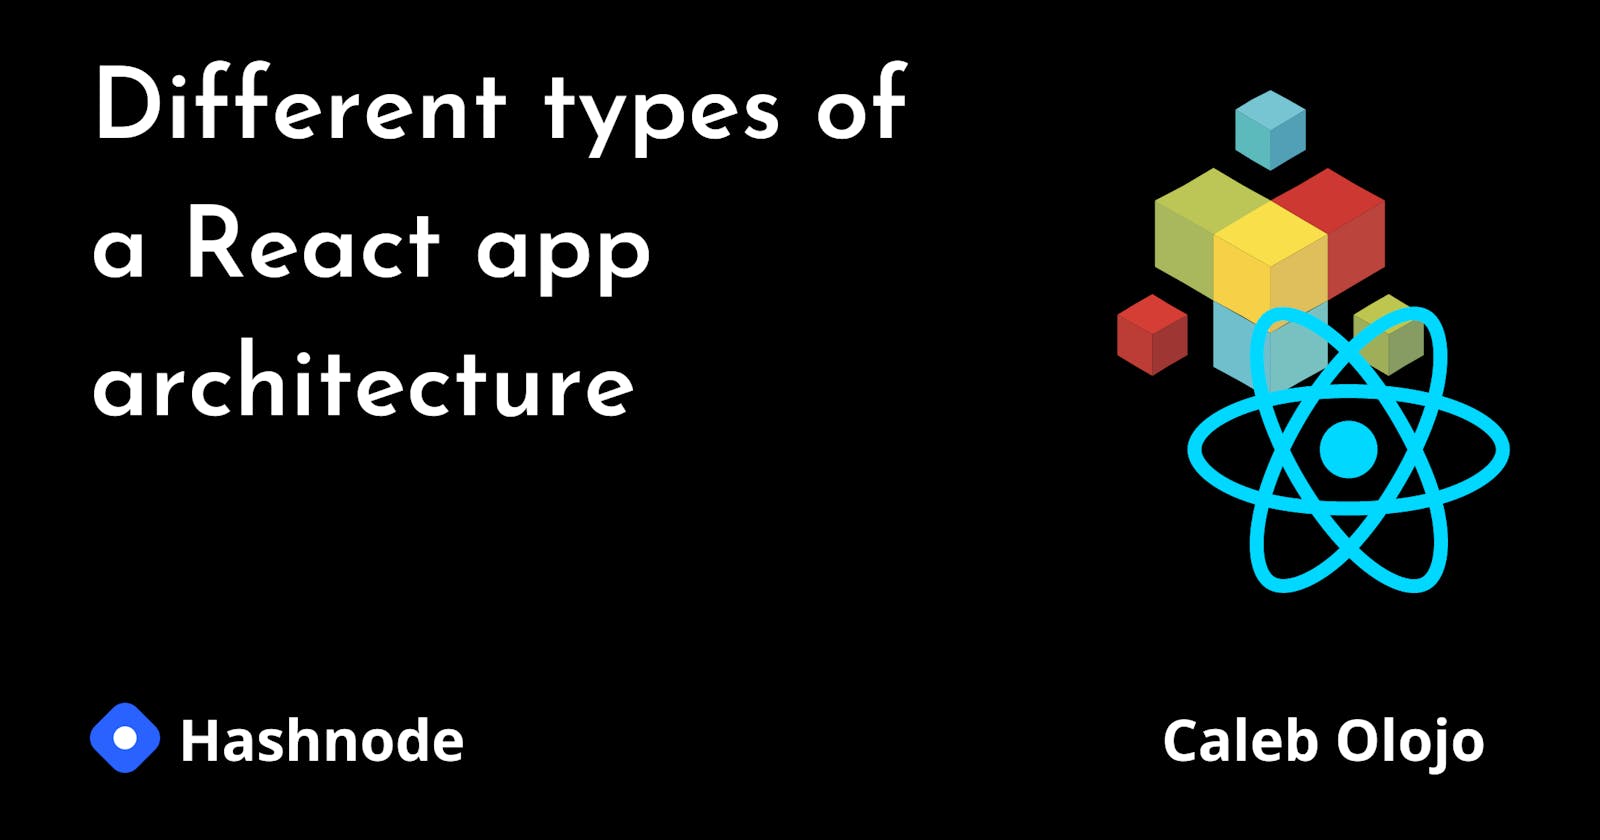 A React's app architecture